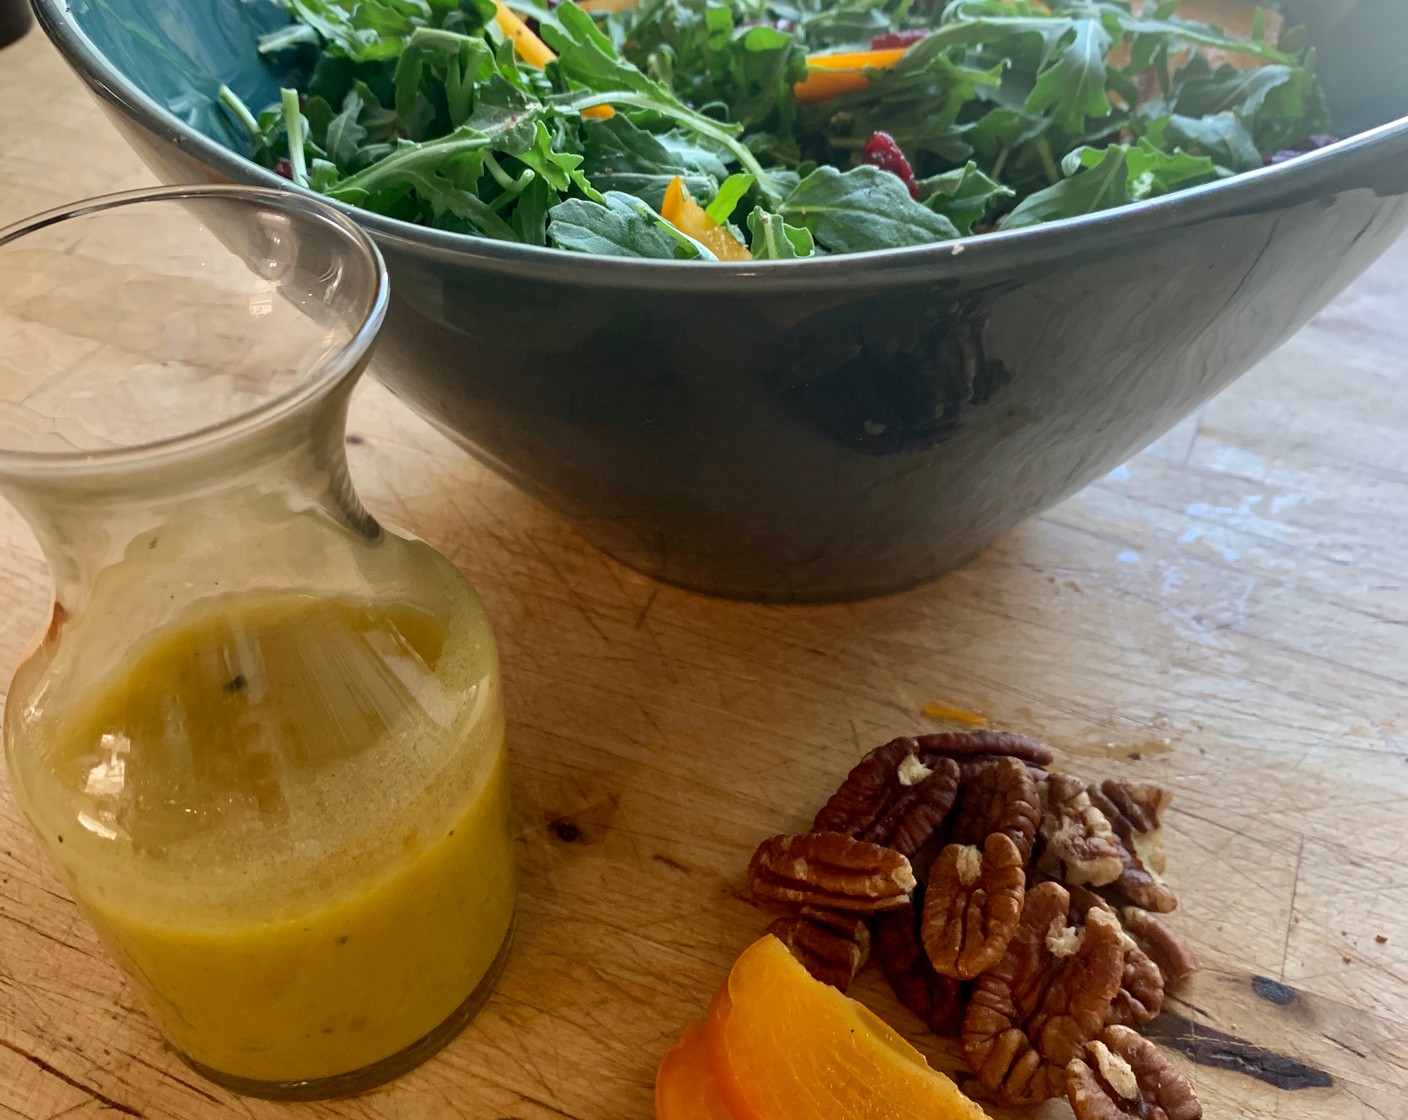 step 2 In a large bowl combine the Arugula (to taste), Dried Persimmons (to taste), Roasted Pecans (to taste), and Dried Cranberries (to taste). Drizzle with the dressing and enjoy.